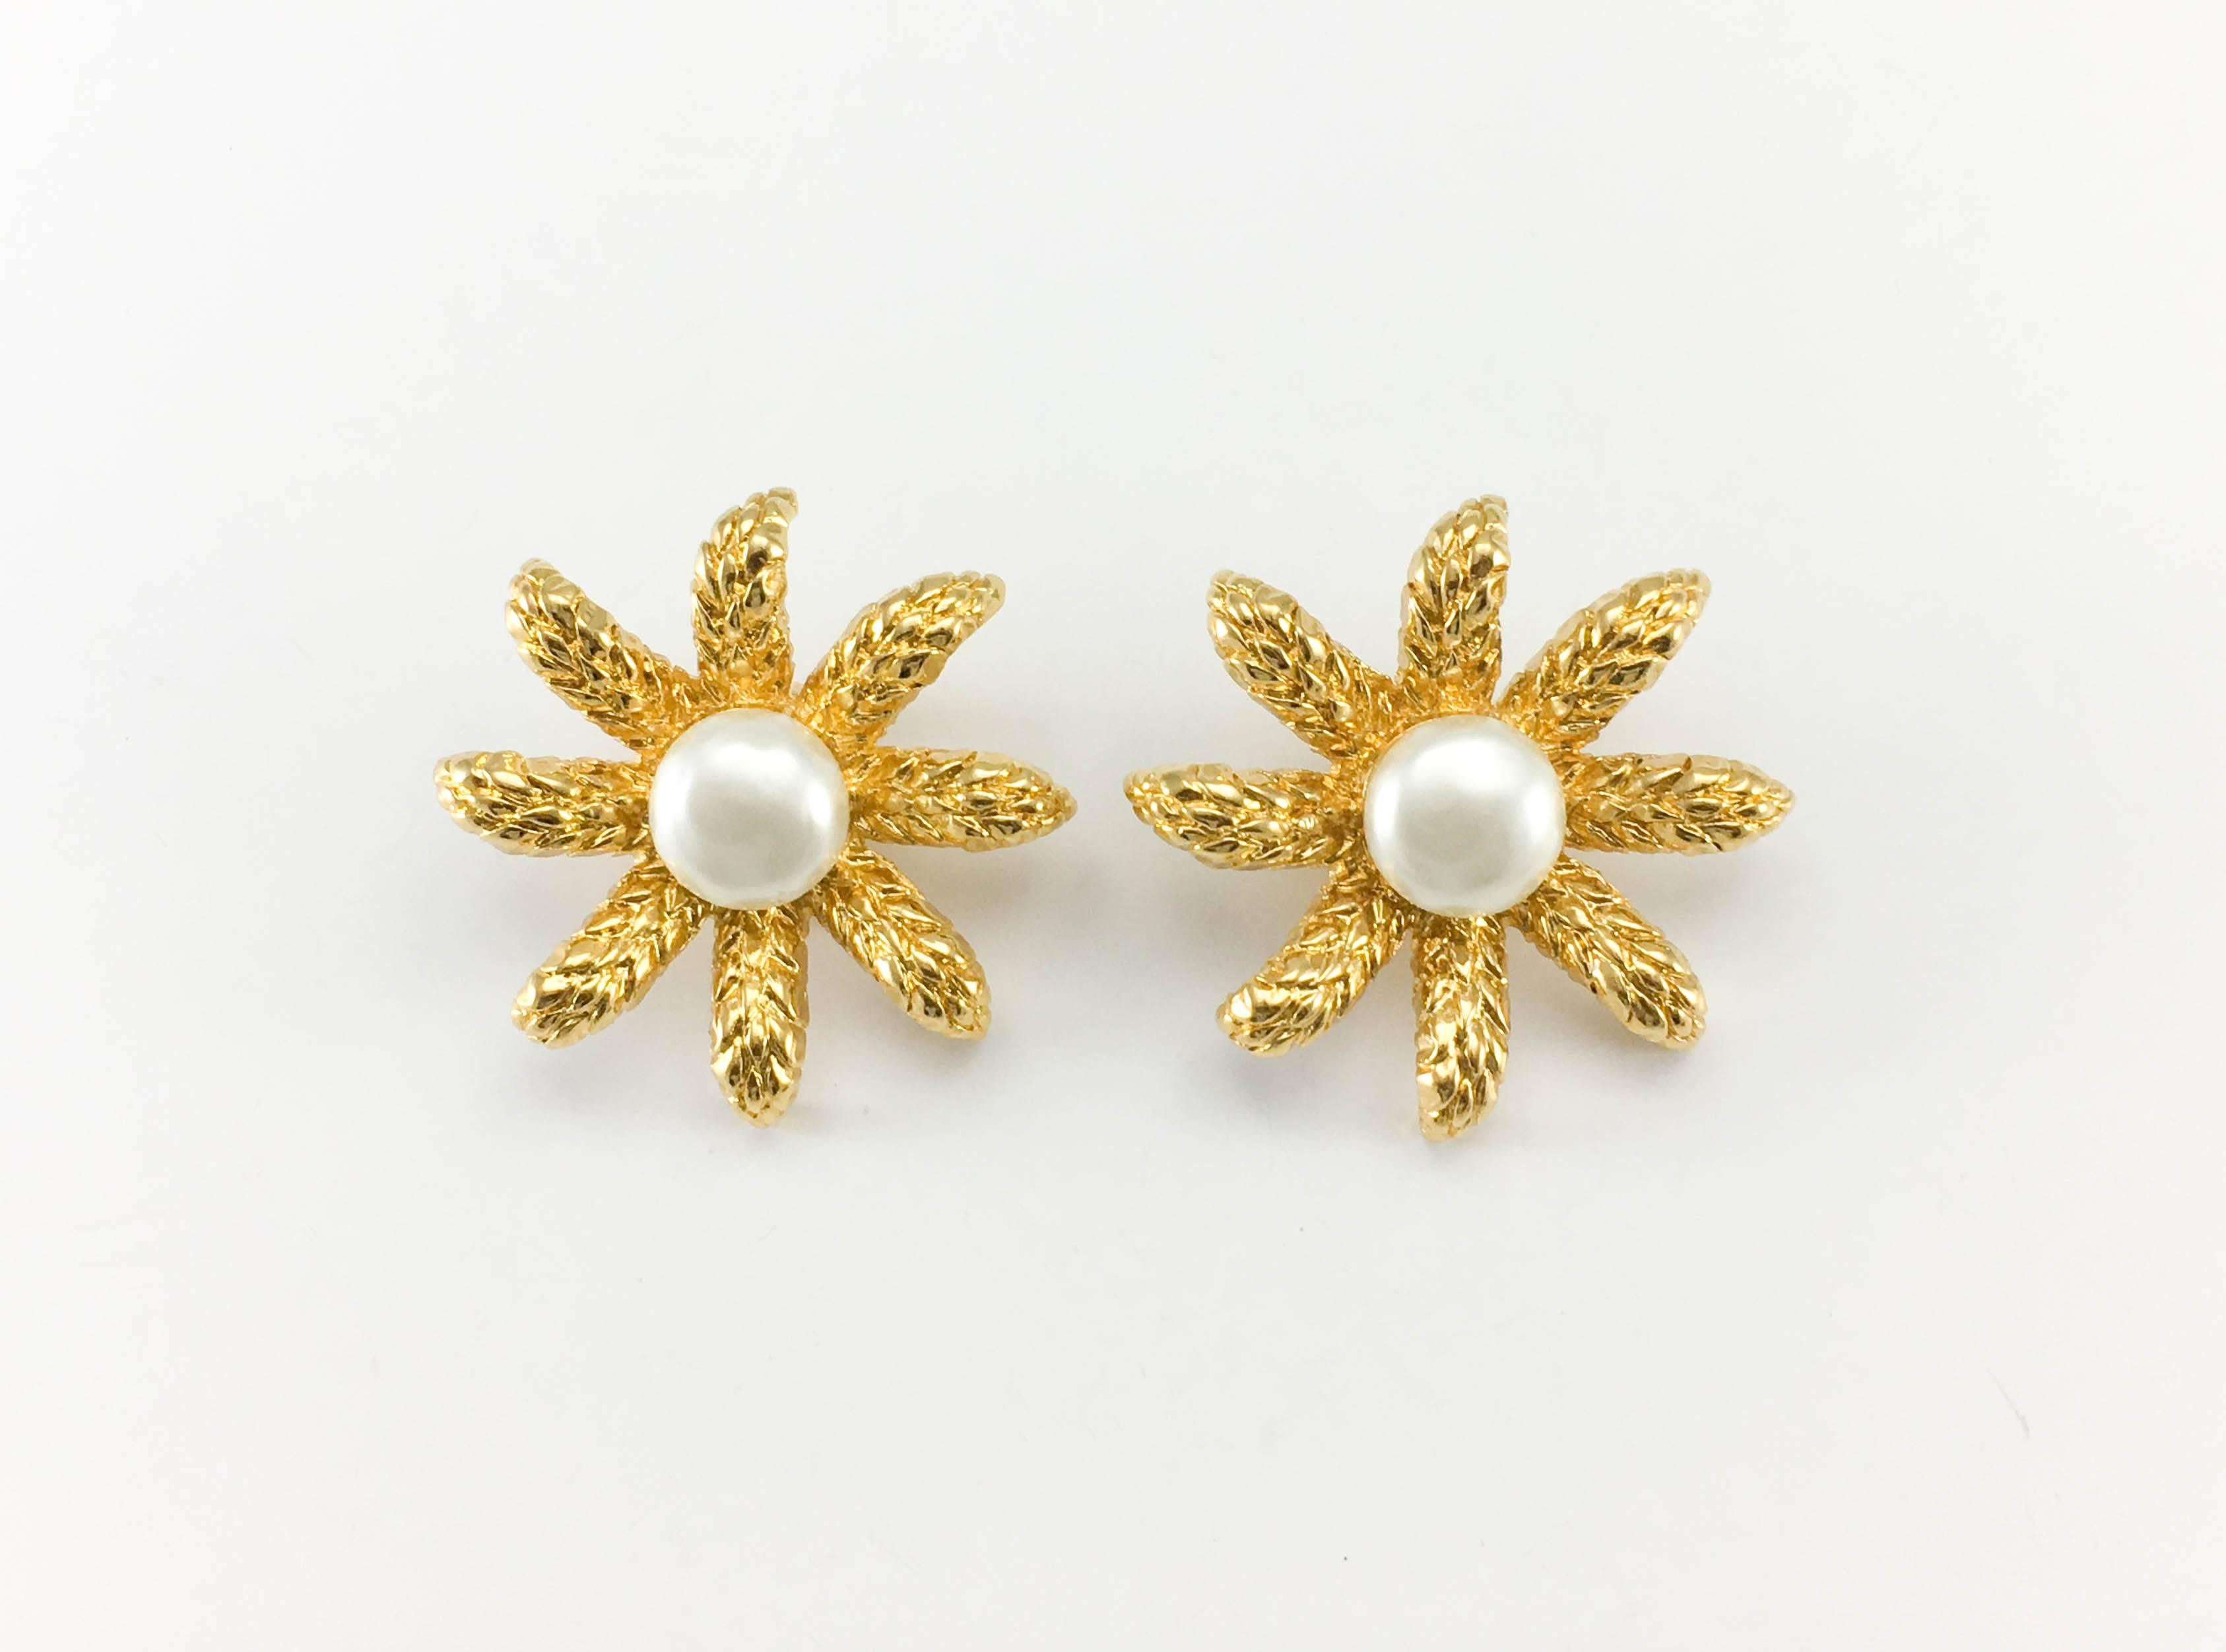 Vintage Chanel Faux Pearl Flower Clip-On Earrings. Made for the 1994 Autumn / Winter collection, these beautiful earrings by Chanel are made in gold-plated metal. In the shape of a flower with long, thin petals, they have a faux pearl cabochon in